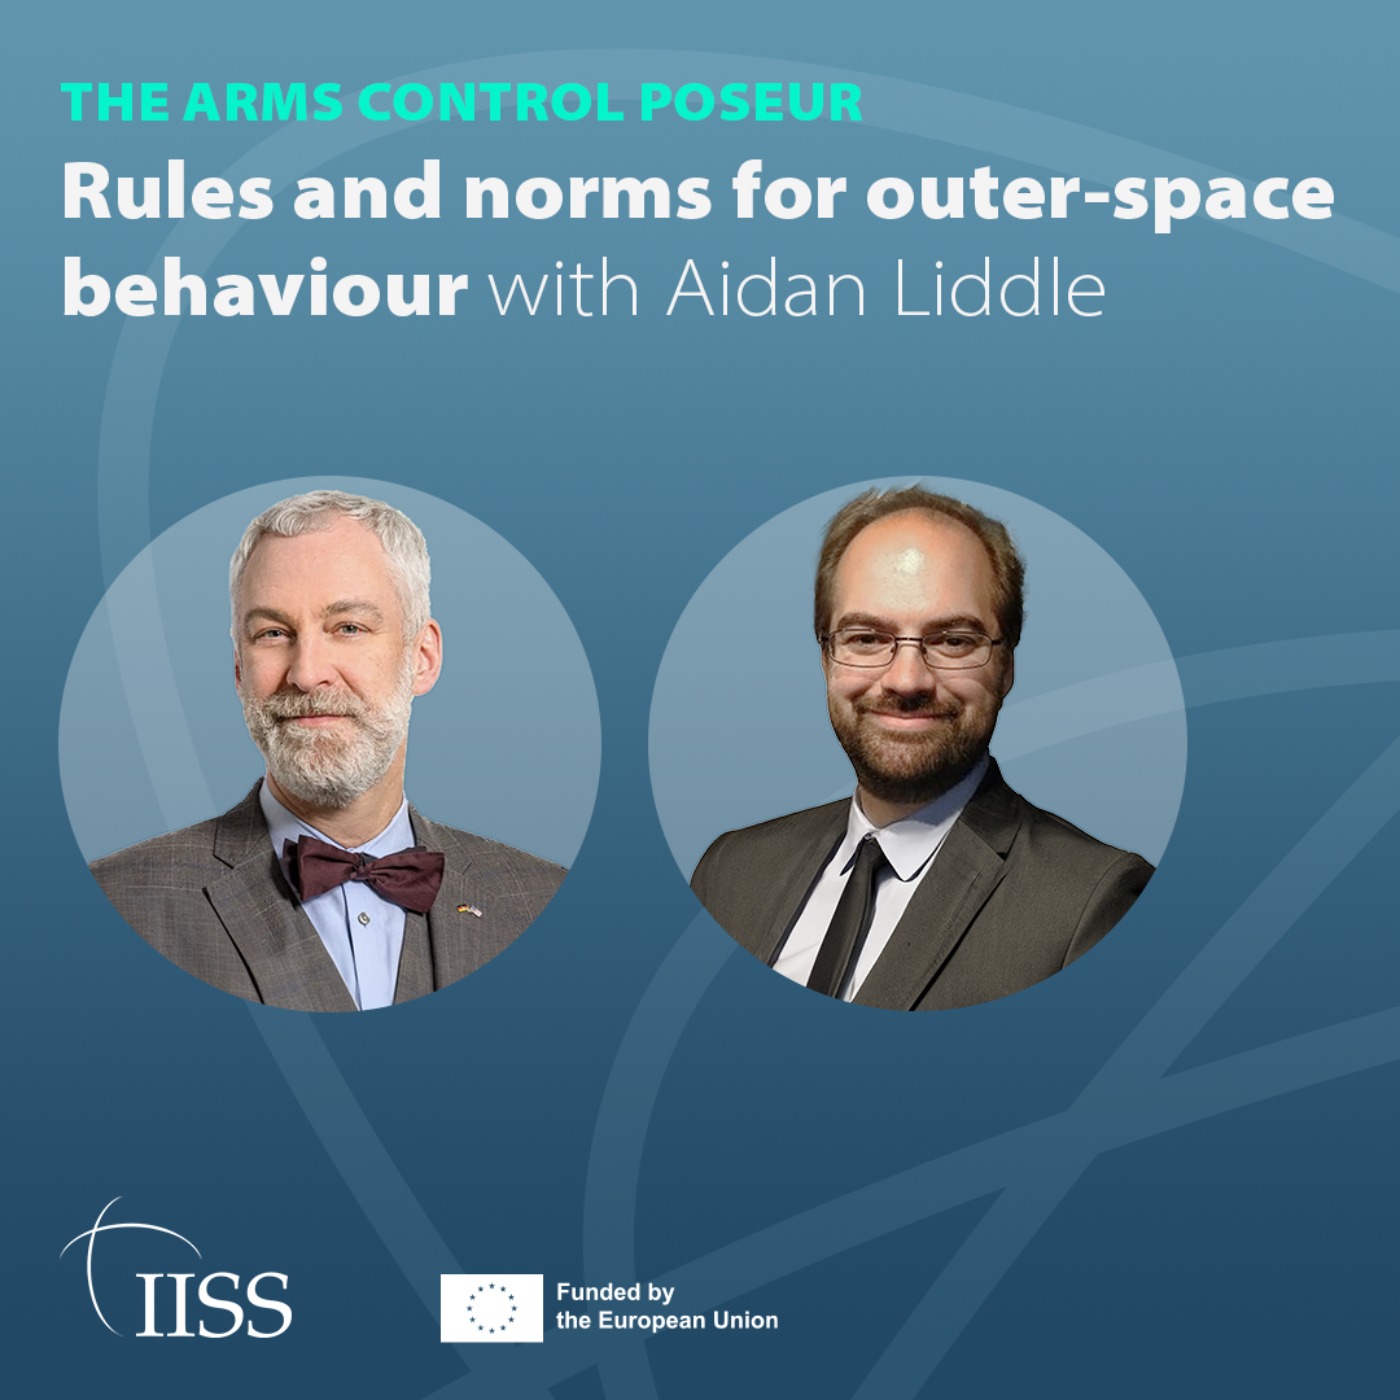 Rules and norms for outer-space behaviour with Aidan Liddle